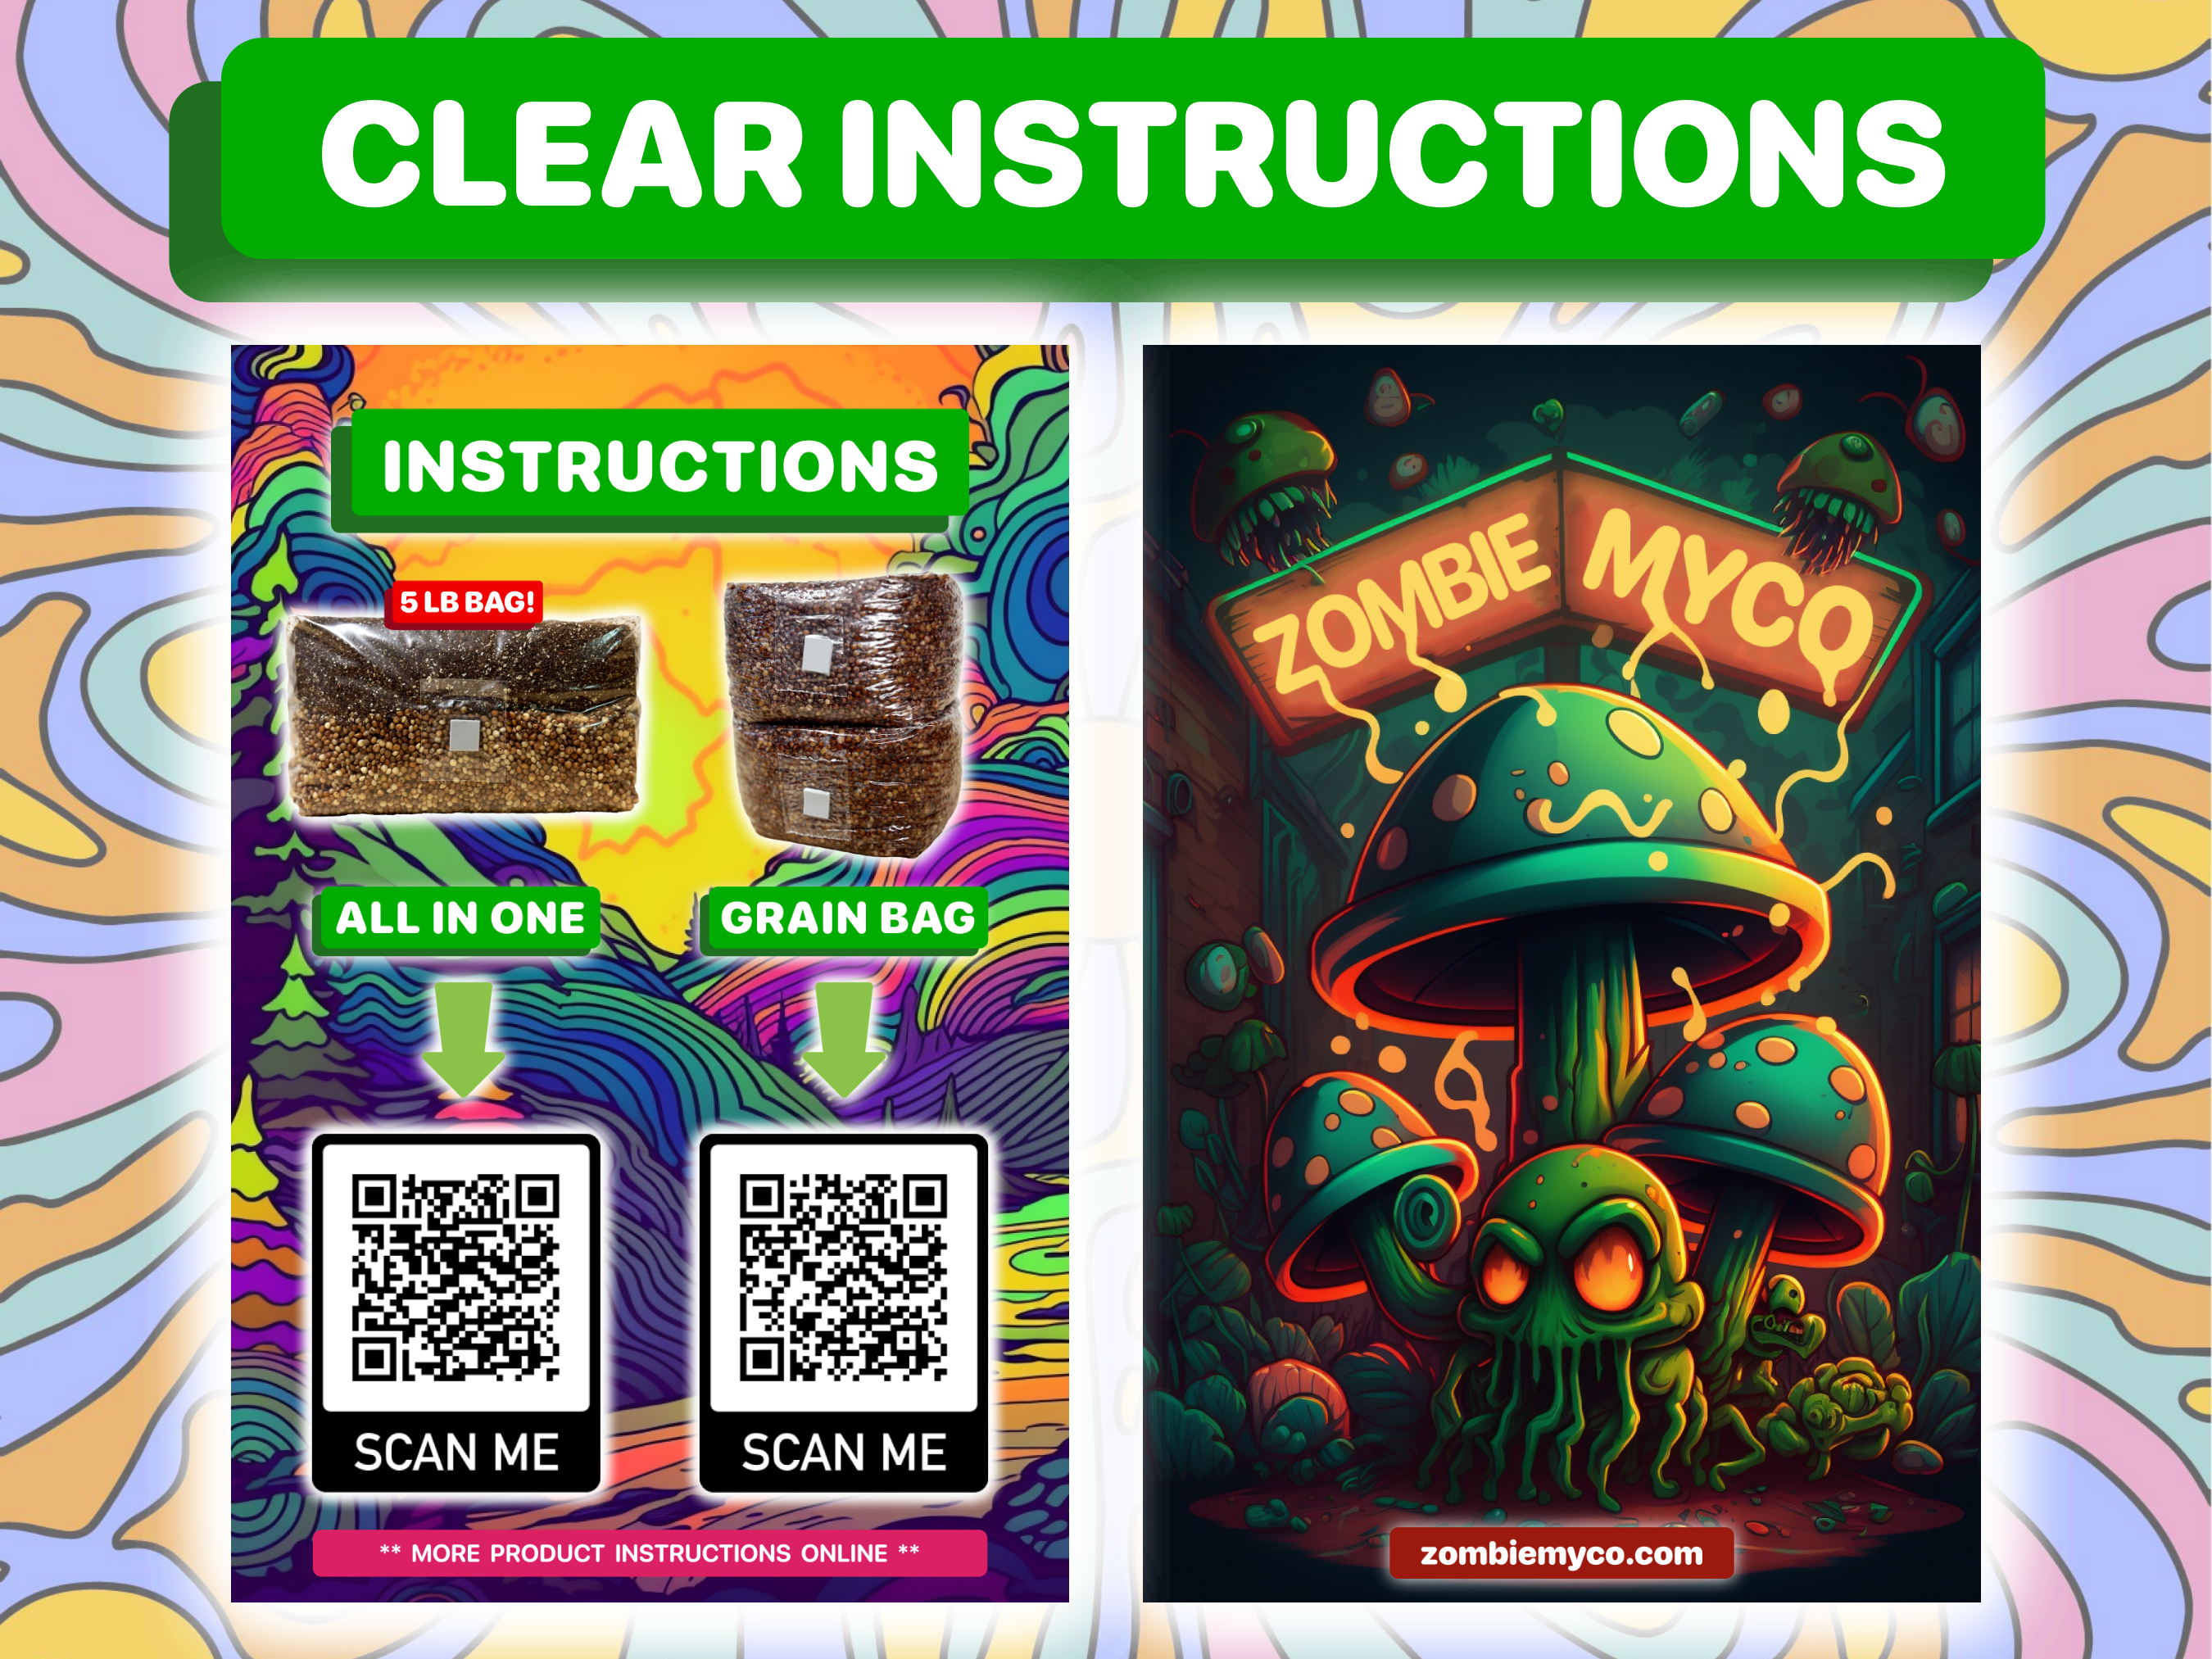 an image of clear instructions on how to purchase - All in One and Grain Bag using QR code